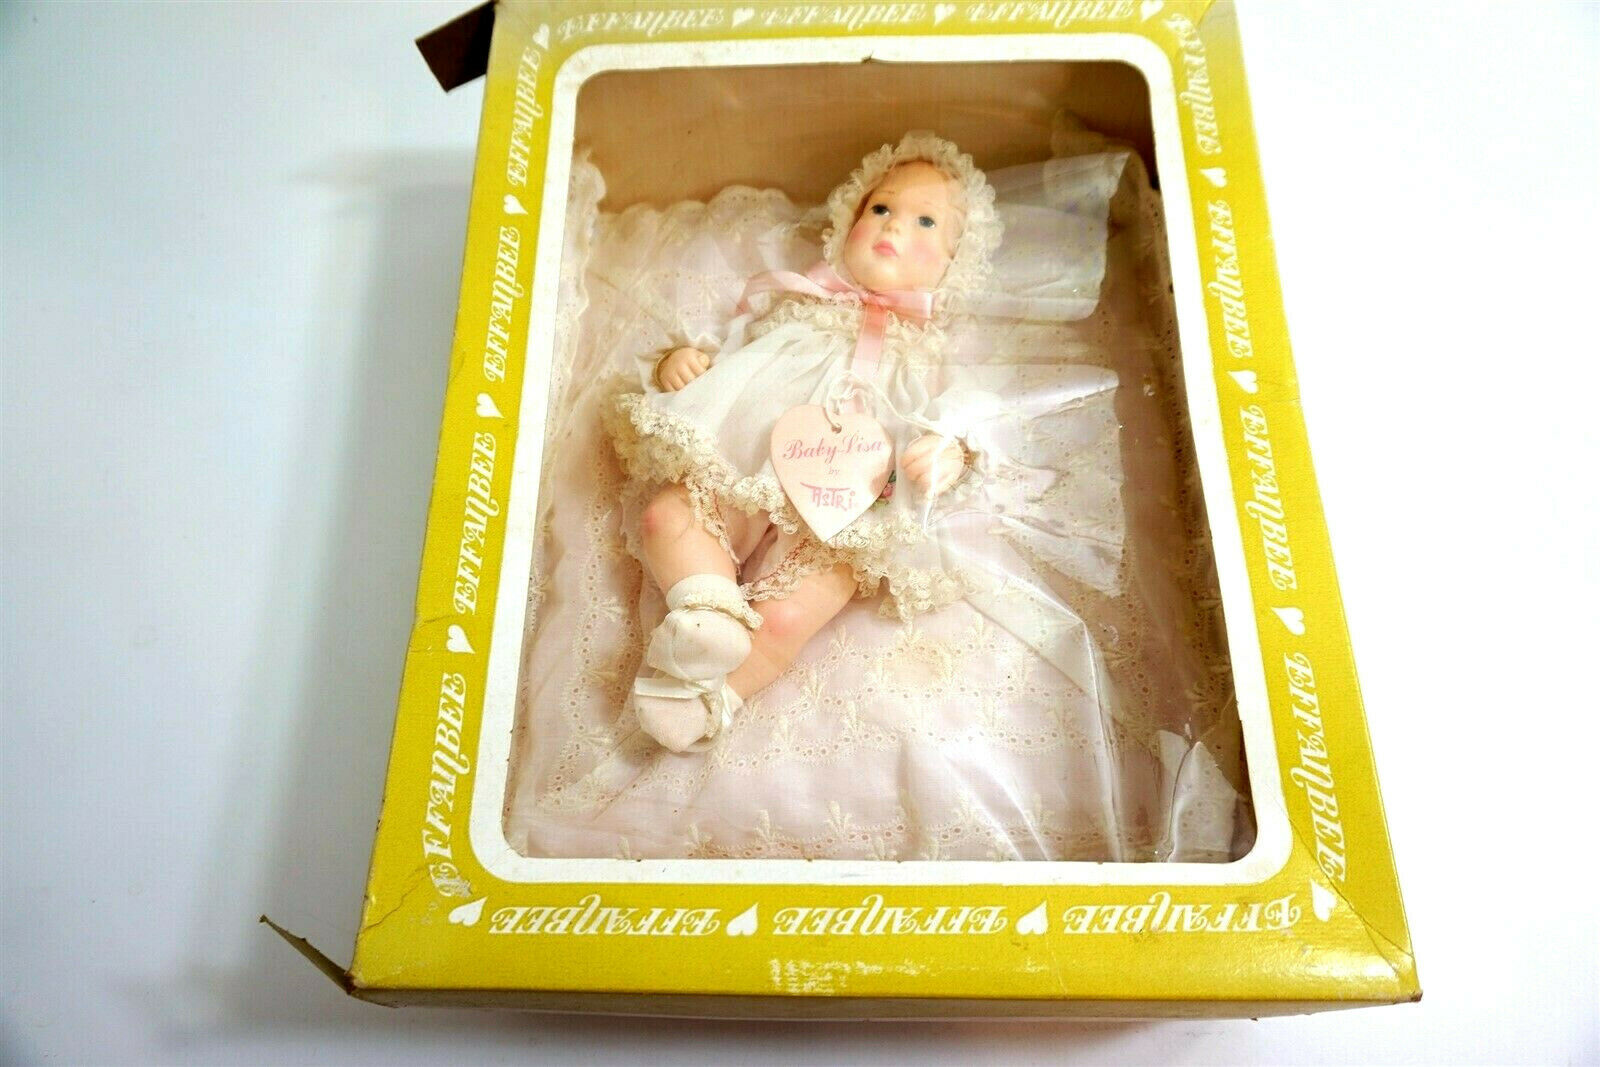 Vintage EFFANBEE Baby Lisa doll by Astri on Pillow No 1012 with Original Box